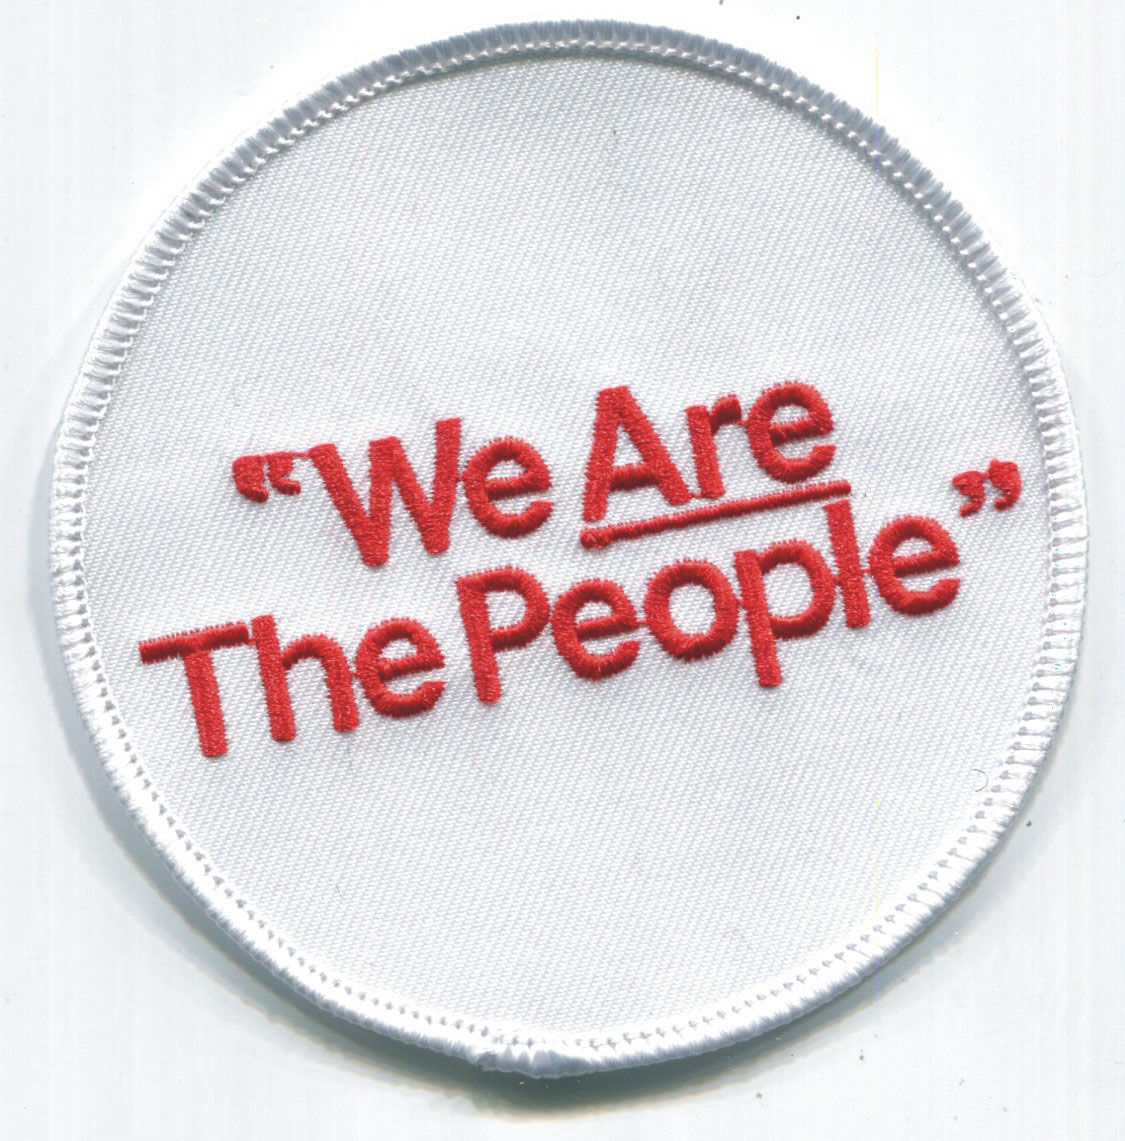 We Are The People Embroidered Patch (Taxi Driver)